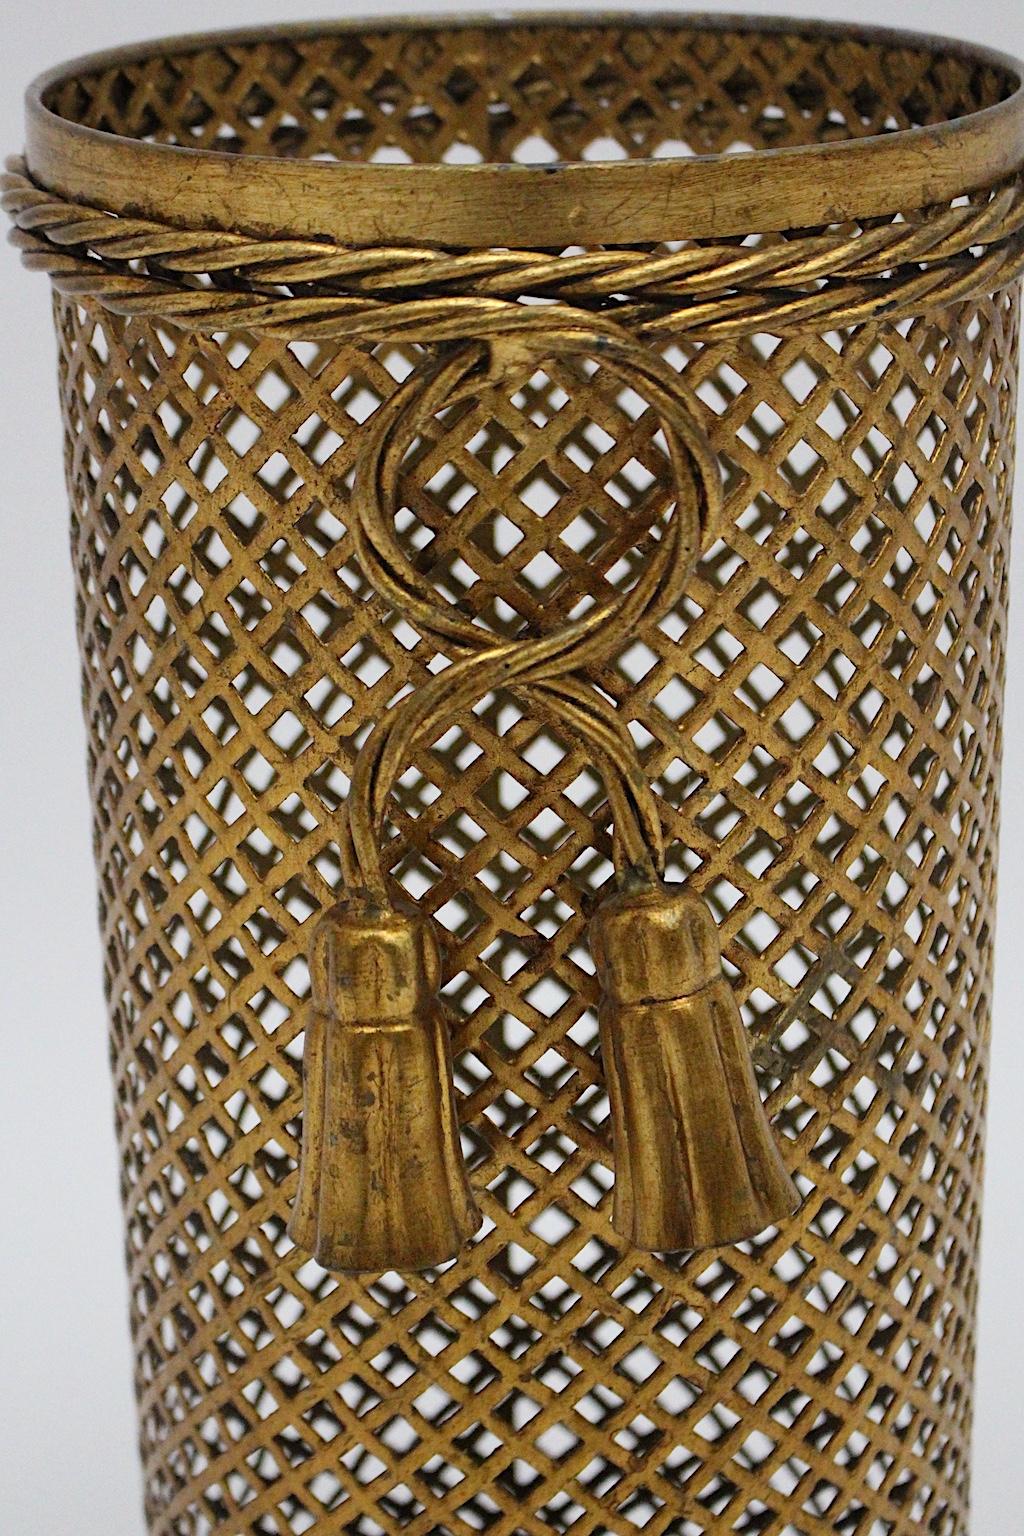 Metal Hollywood Regency Style Gilded Umbrella Stand by Li Puma Firenze, 1950s, Italy For Sale